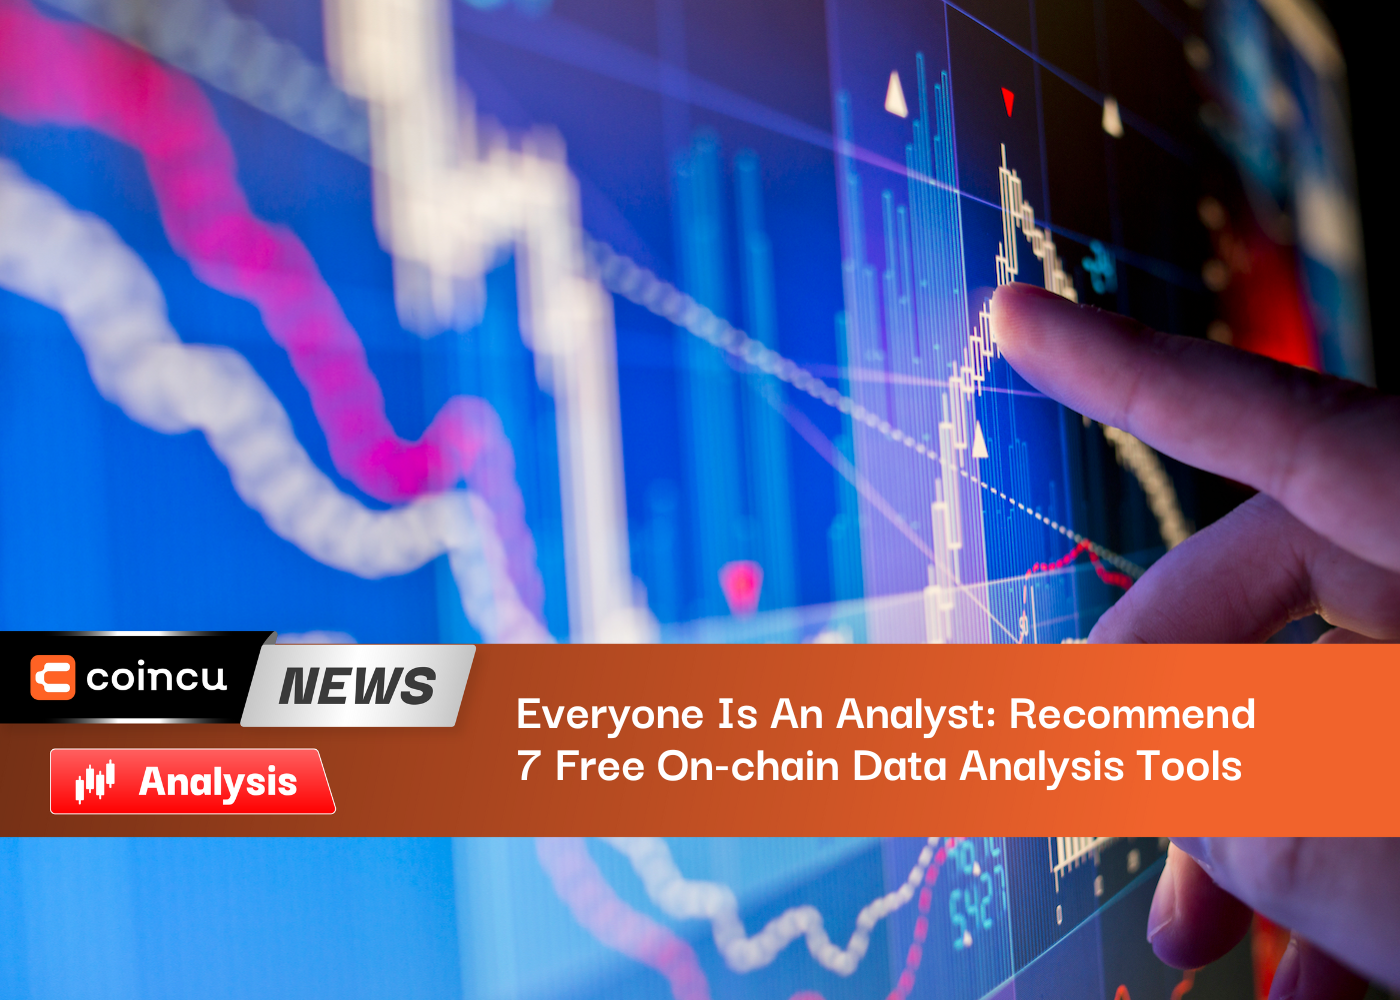 Everyone Is An Analyst: Recommend 7 Free On-chain Data Analysis Tools